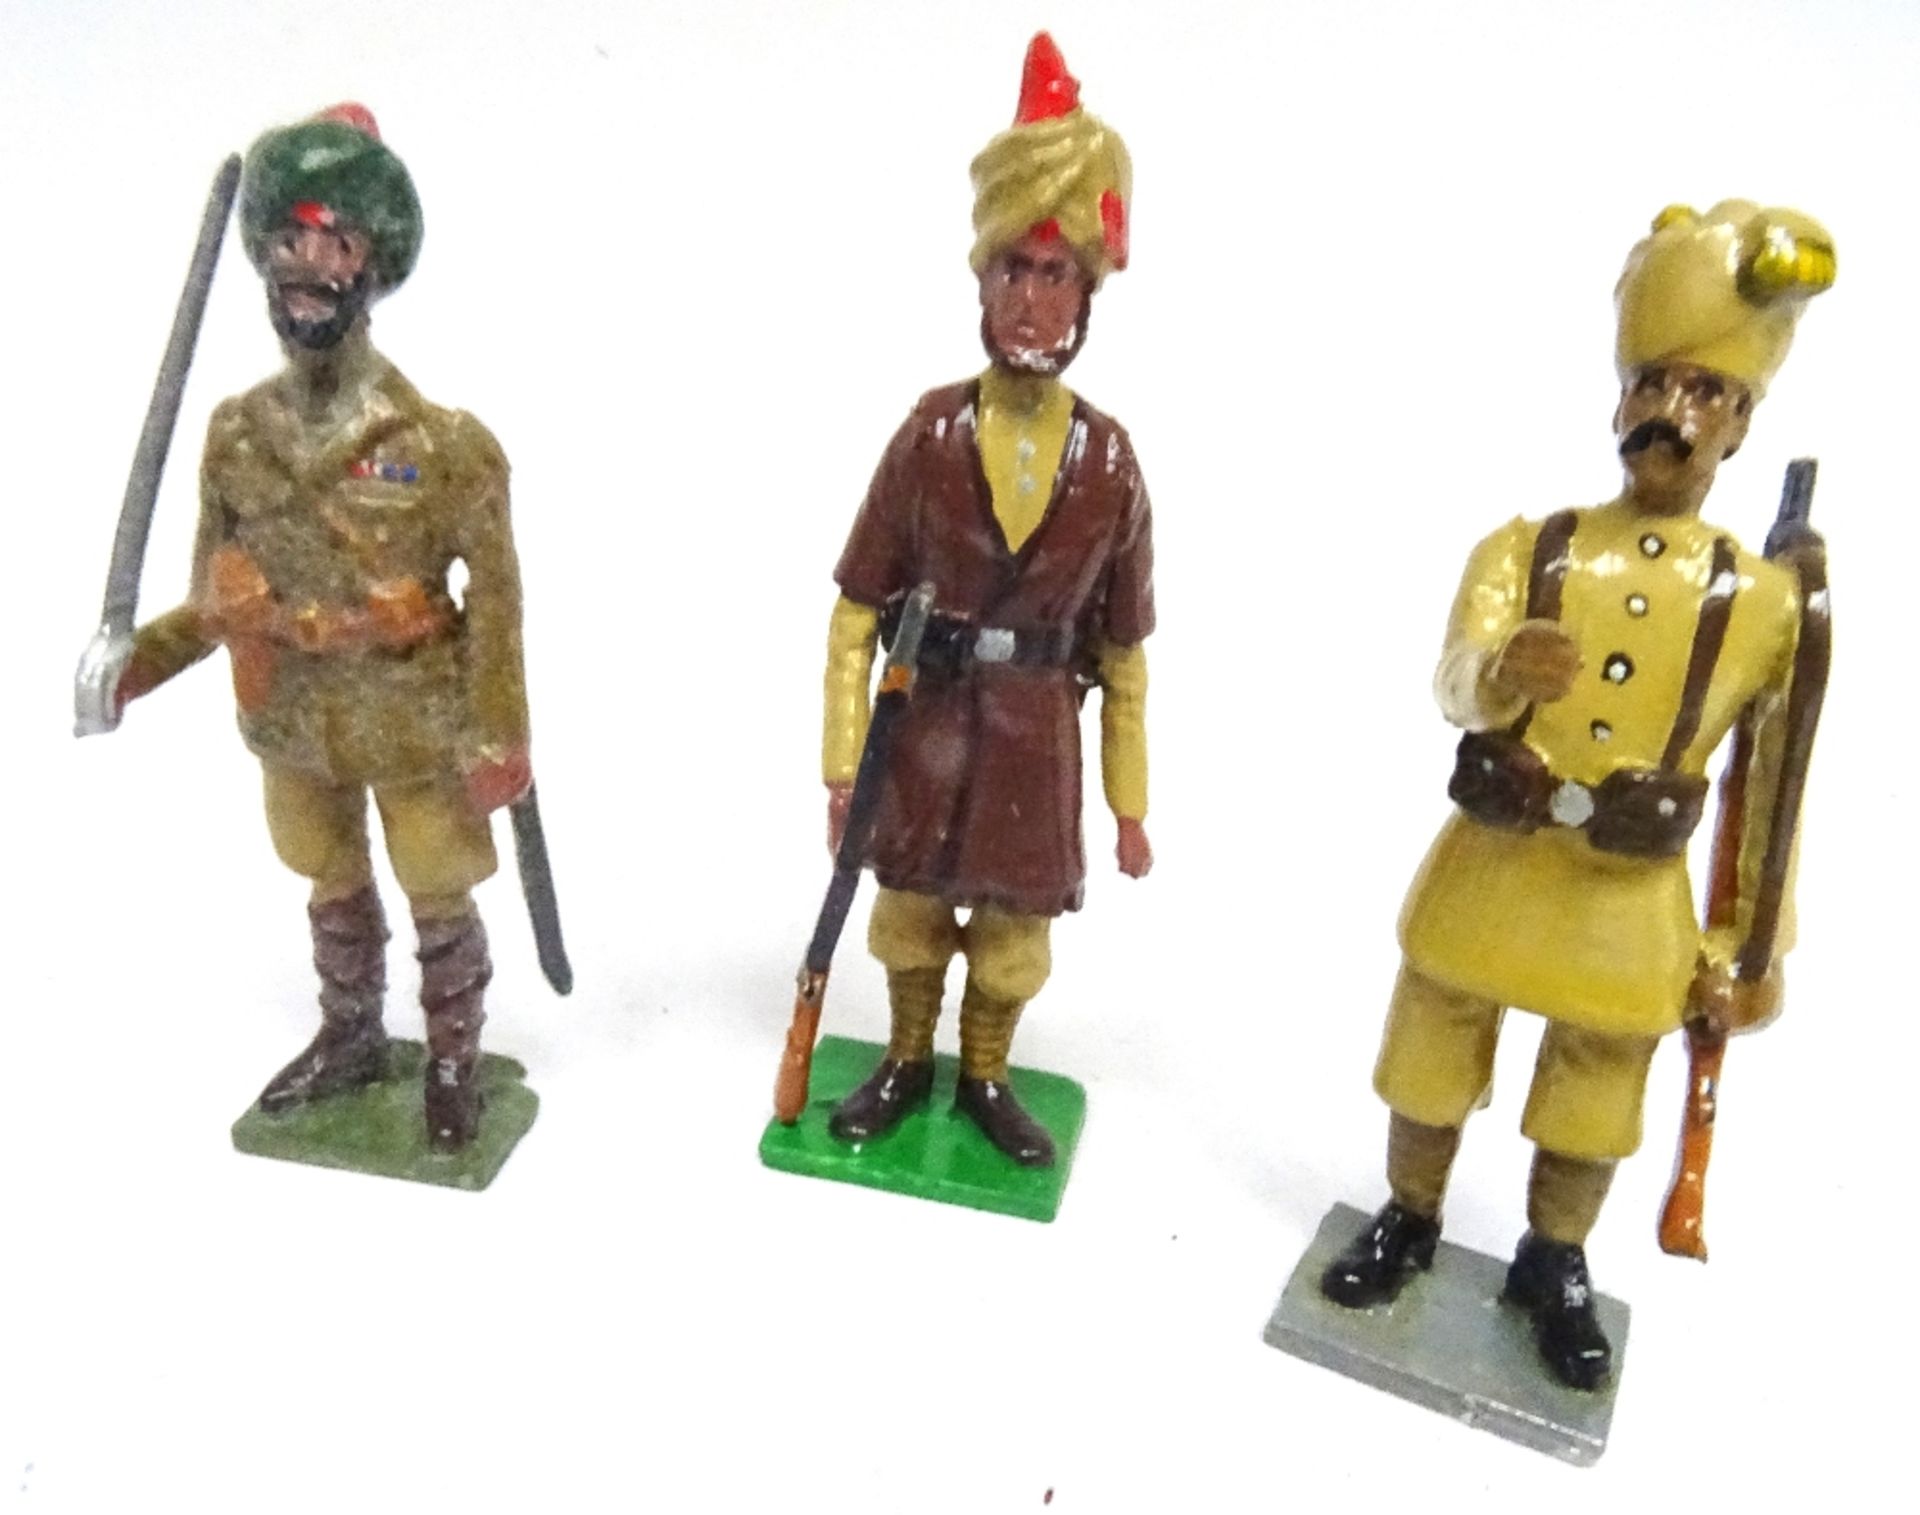 British Indian Army New Toy Soldiers with Maxim and Lewis Guns - Image 4 of 10